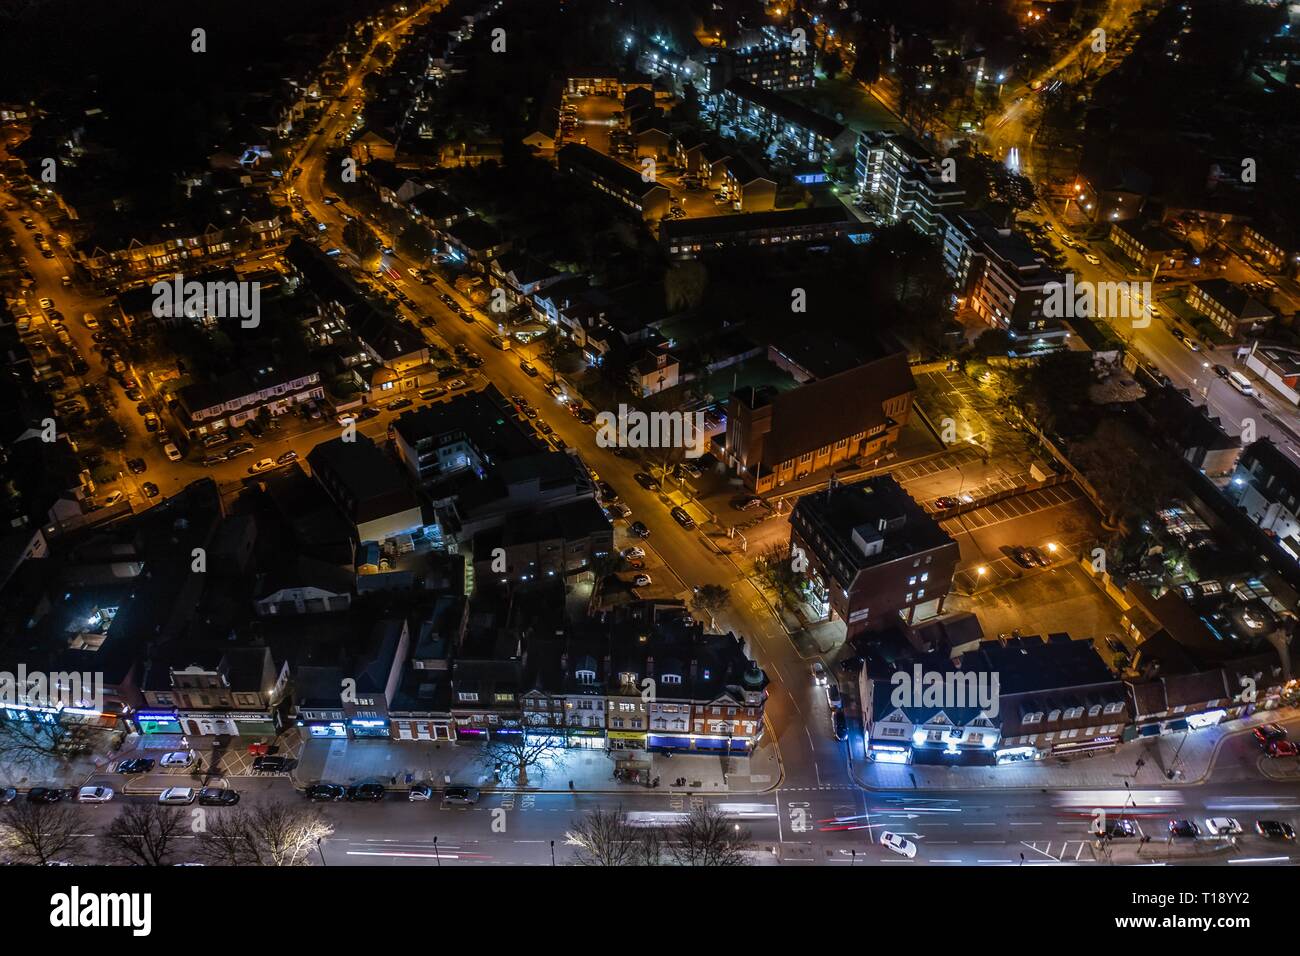 Aerial images of North London suburbs at night Stock Photo